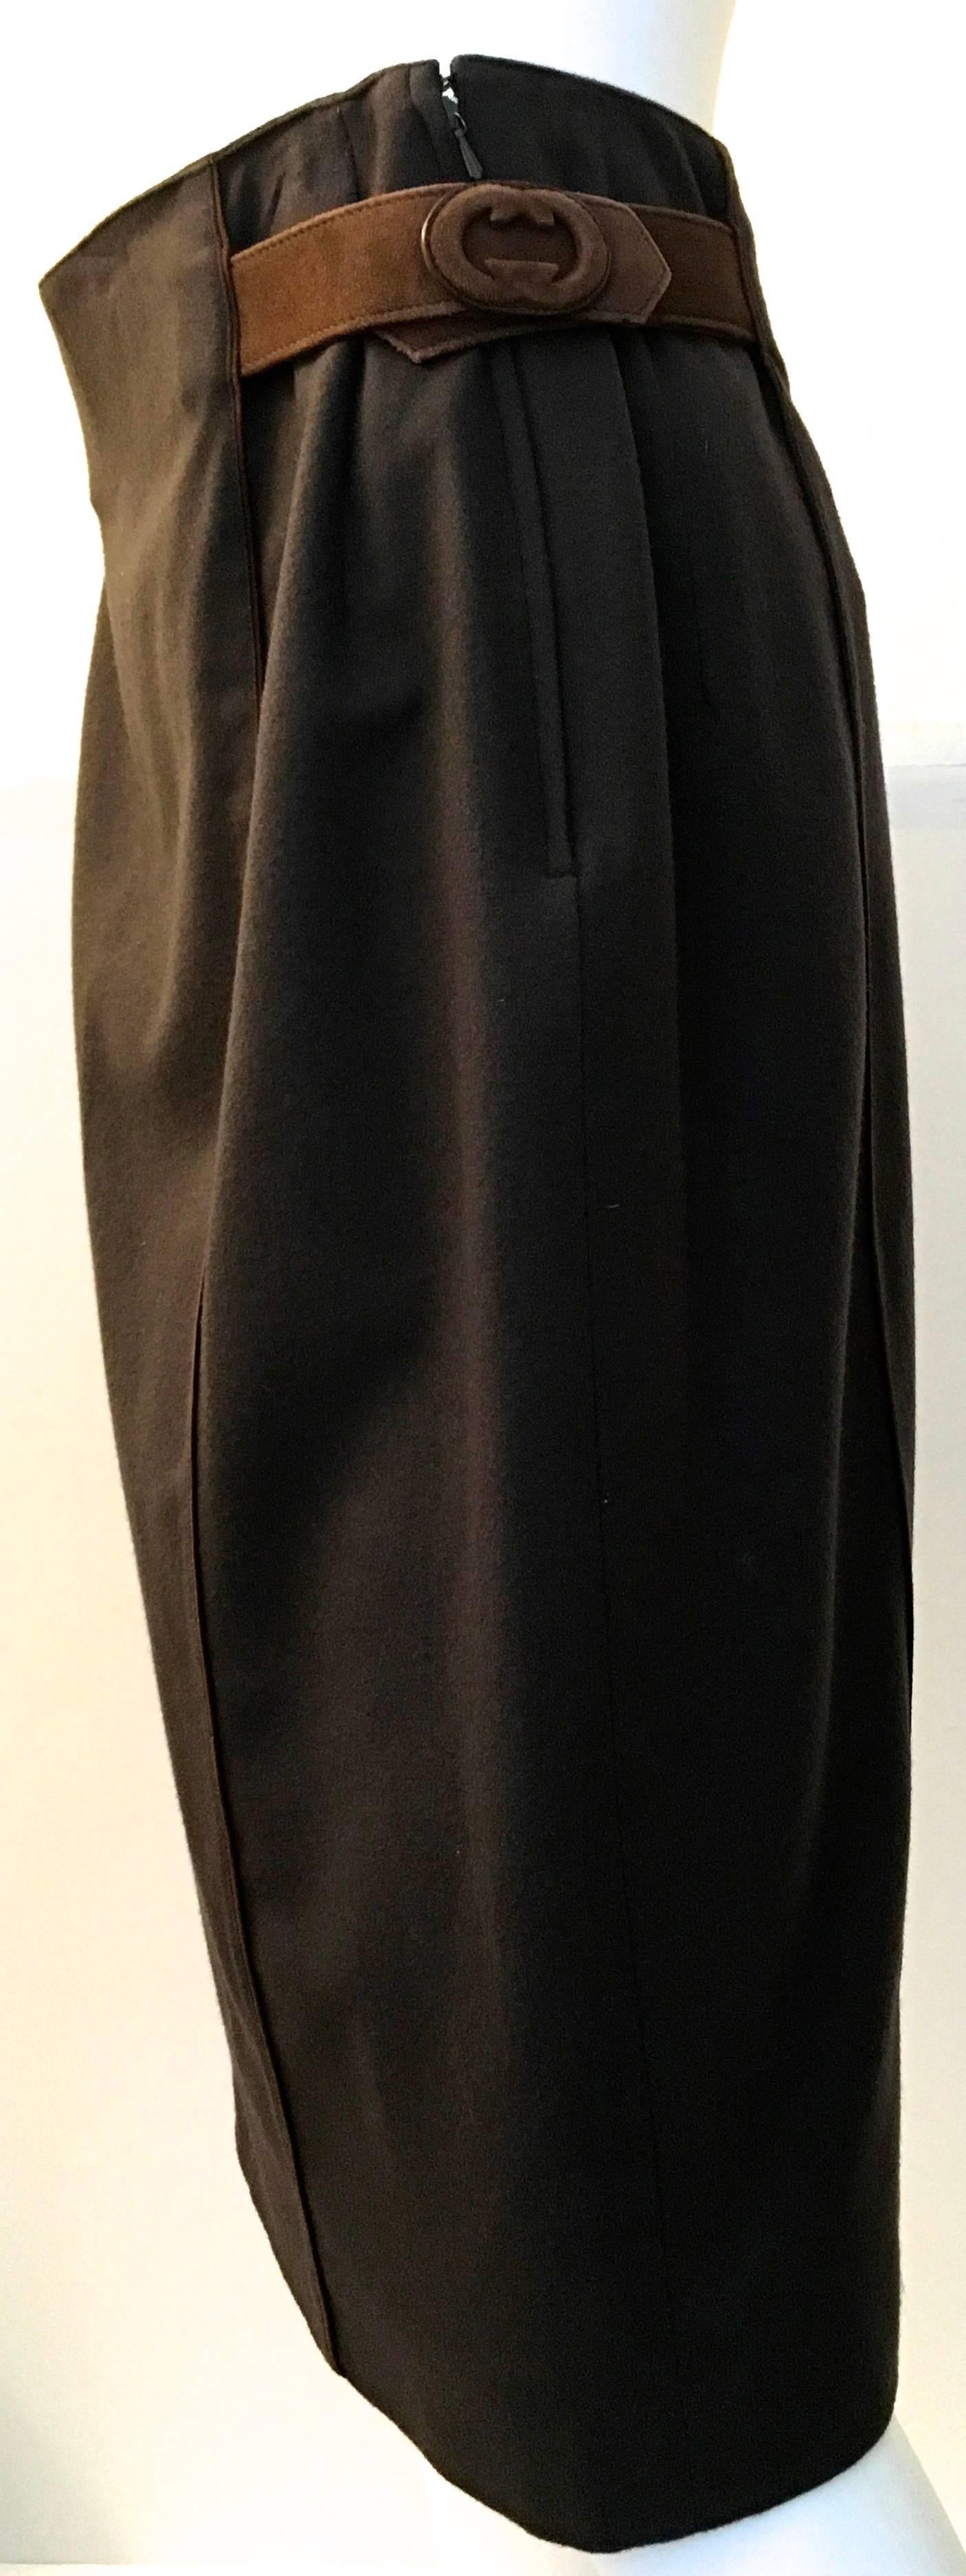 Presented here is a lovely skirt from Gucci. This vintage masterpiece is in mint condition and still has its original tags on it from the 1980's. The skirt is made of a soft brown wool and it is fully lined. There is a leather belt that is sewn into